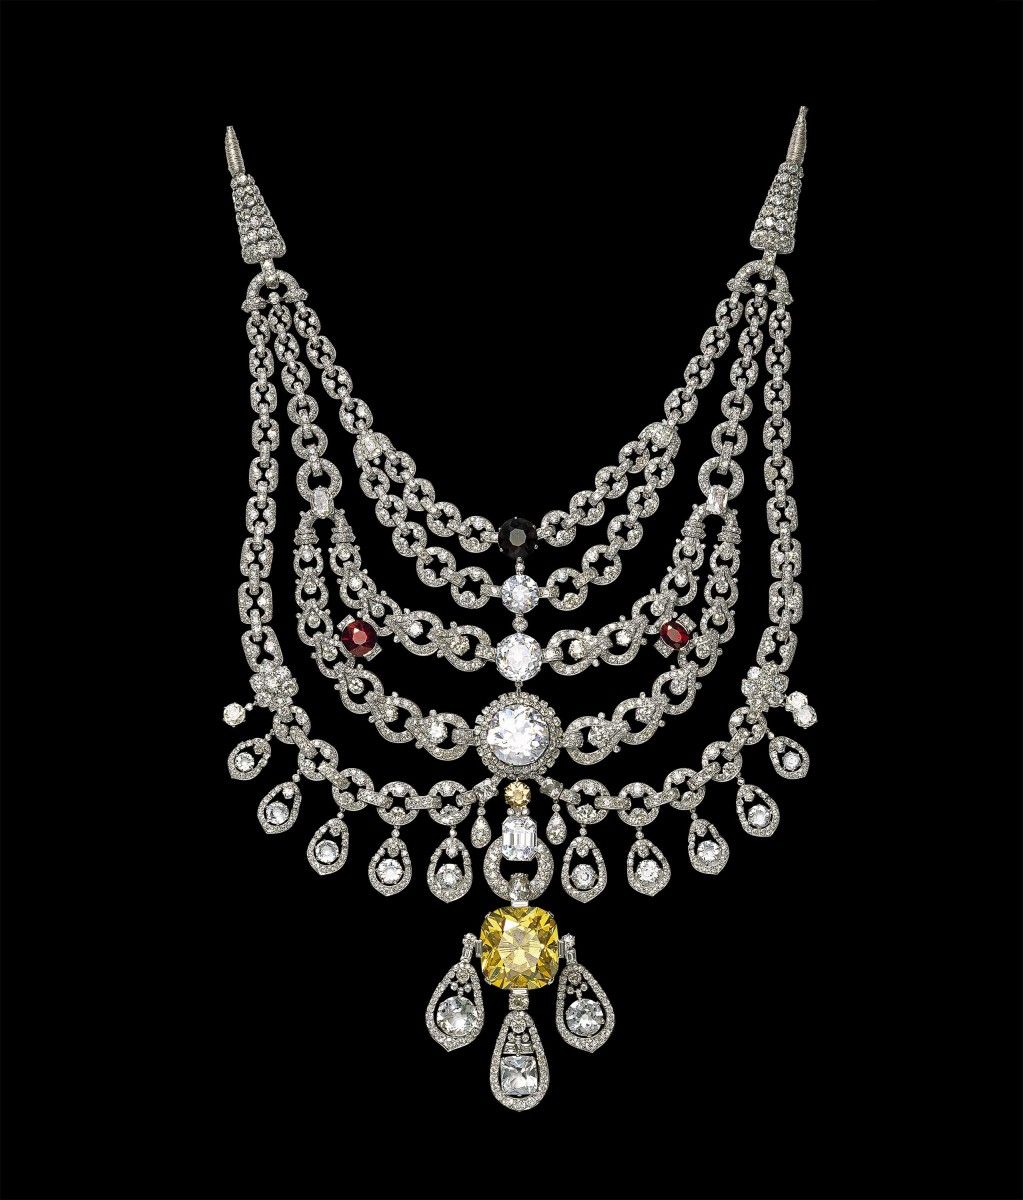 The Patalia Necklace by Cartier, the 